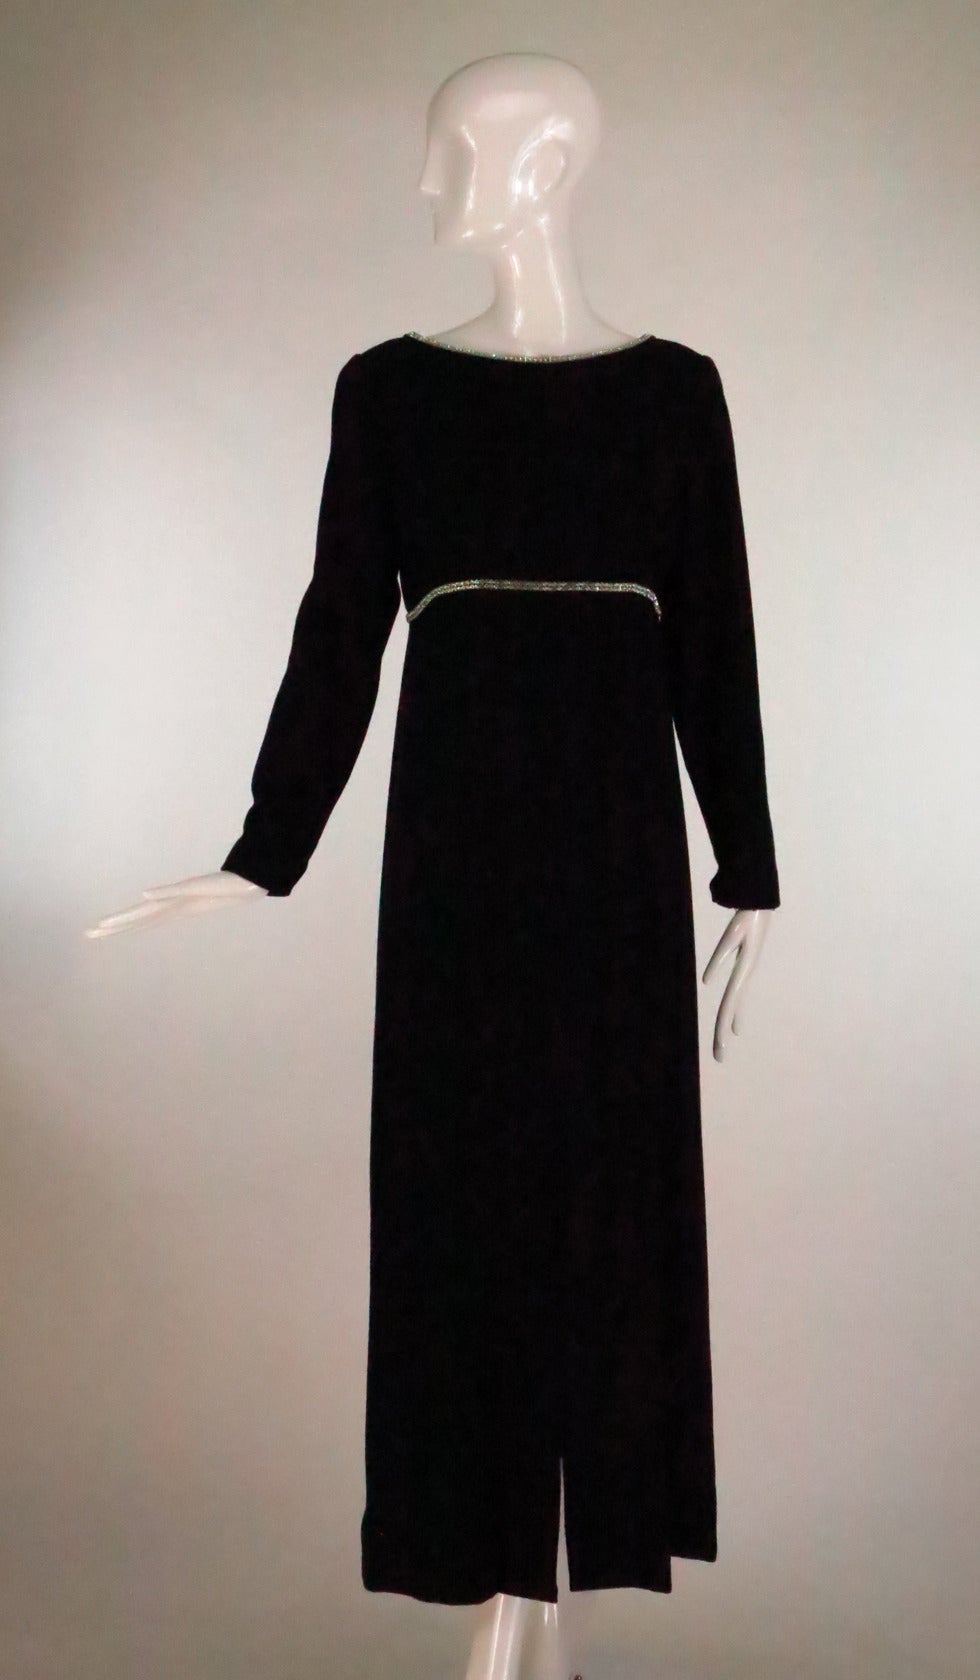 Mollie Parnis 1960s empire waist mod style maxi dress in black wool crepe...Open round neckline which dips low in the back is trimmed in a double row or rhinestones, there are also a double row of rhinestones under the bust...Long tapered